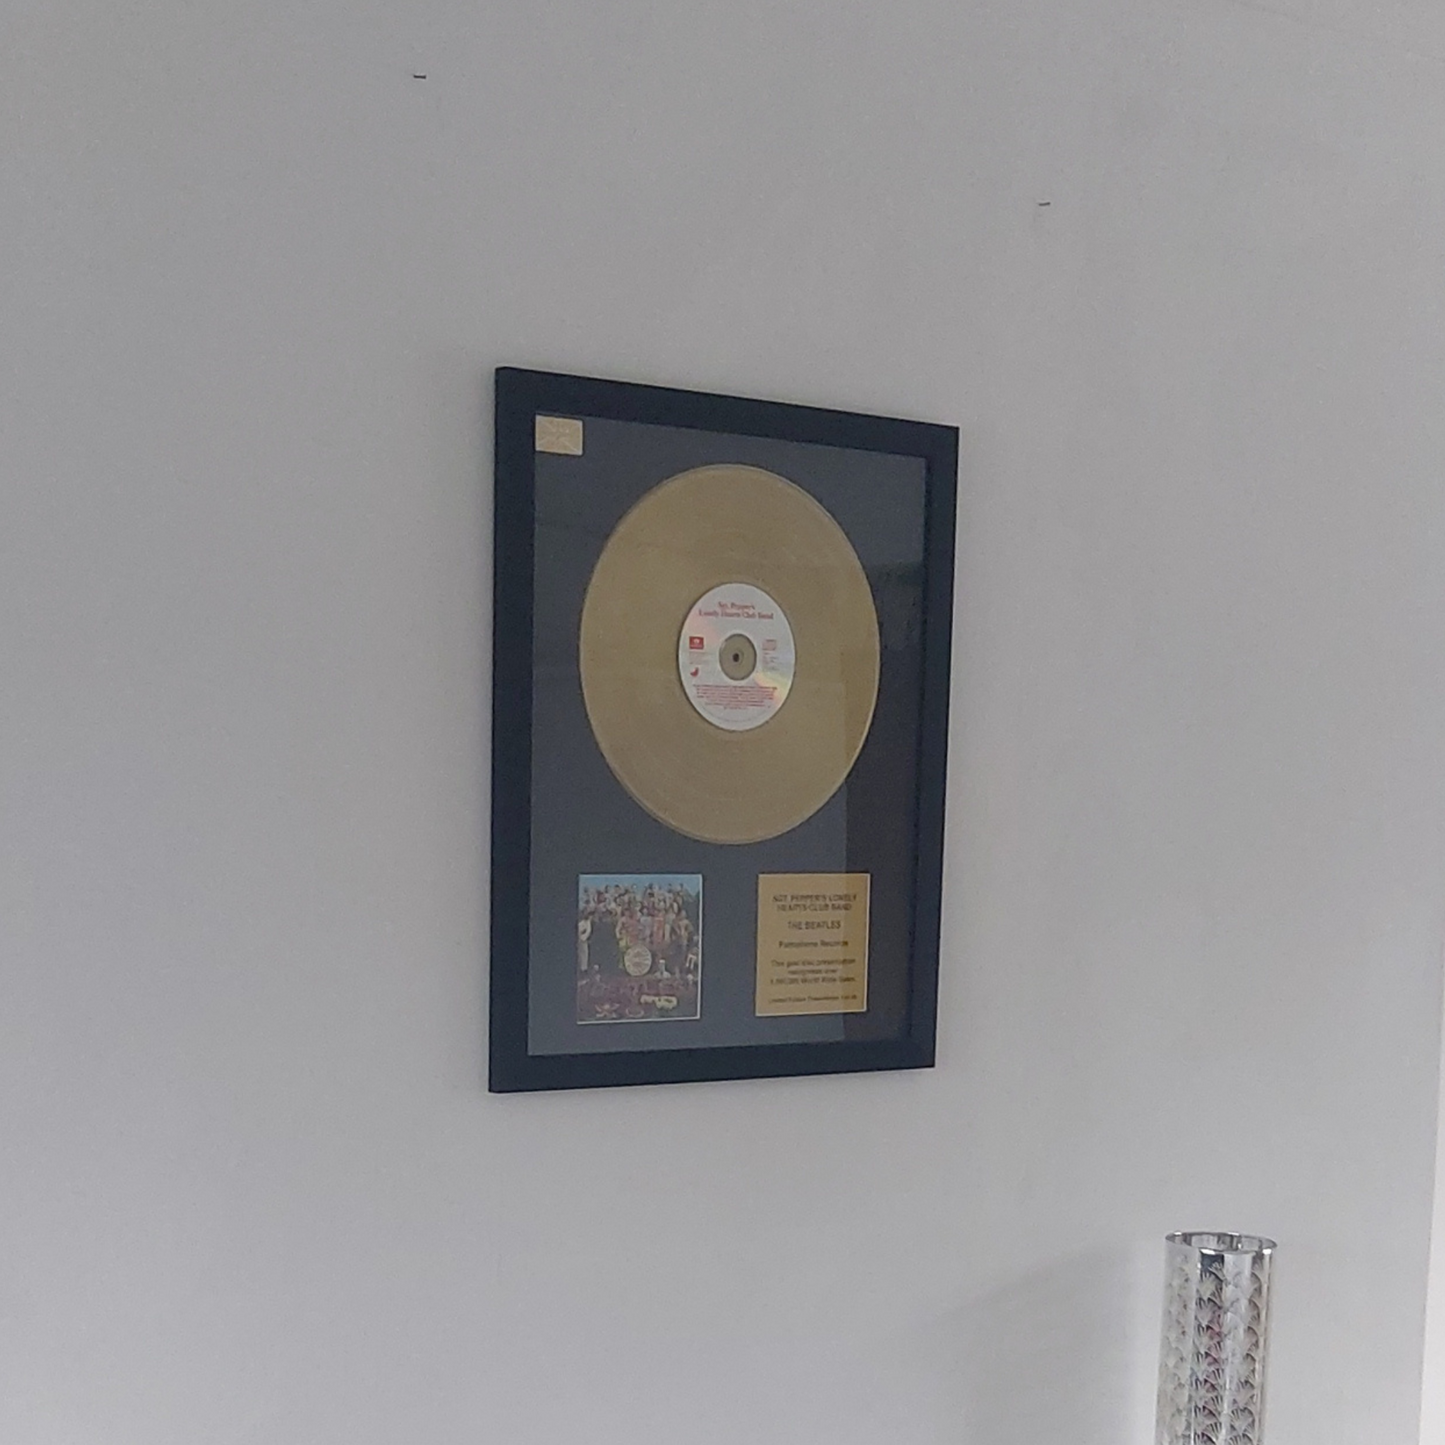 THE BEATLES - Sgt. Pepper's Lonely Hearts Club Band | Gold Record & CD Presentation